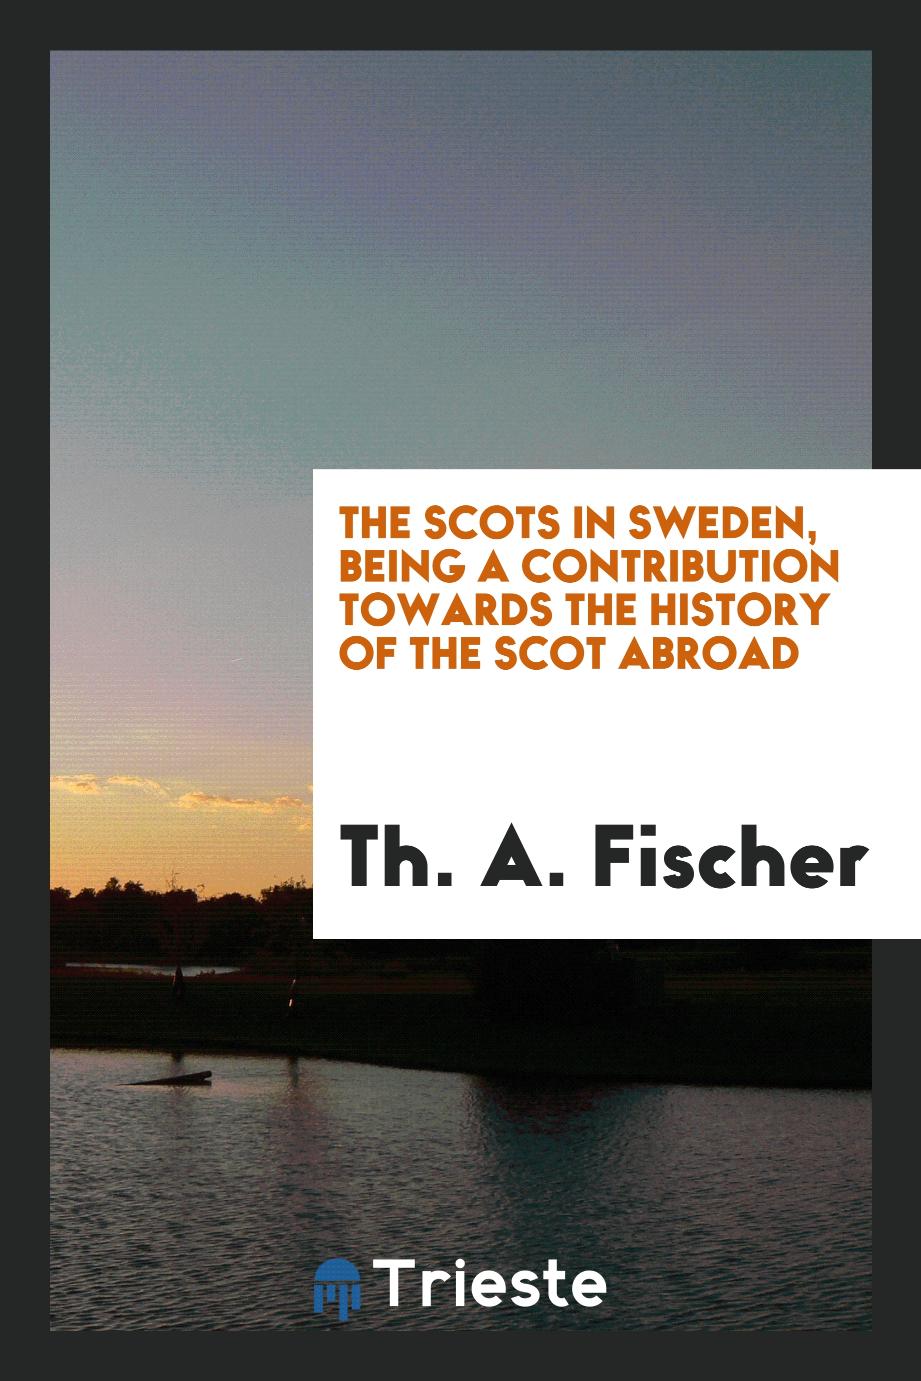 The Scots in Sweden, Being a Contribution Towards the History of the Scot Abroad